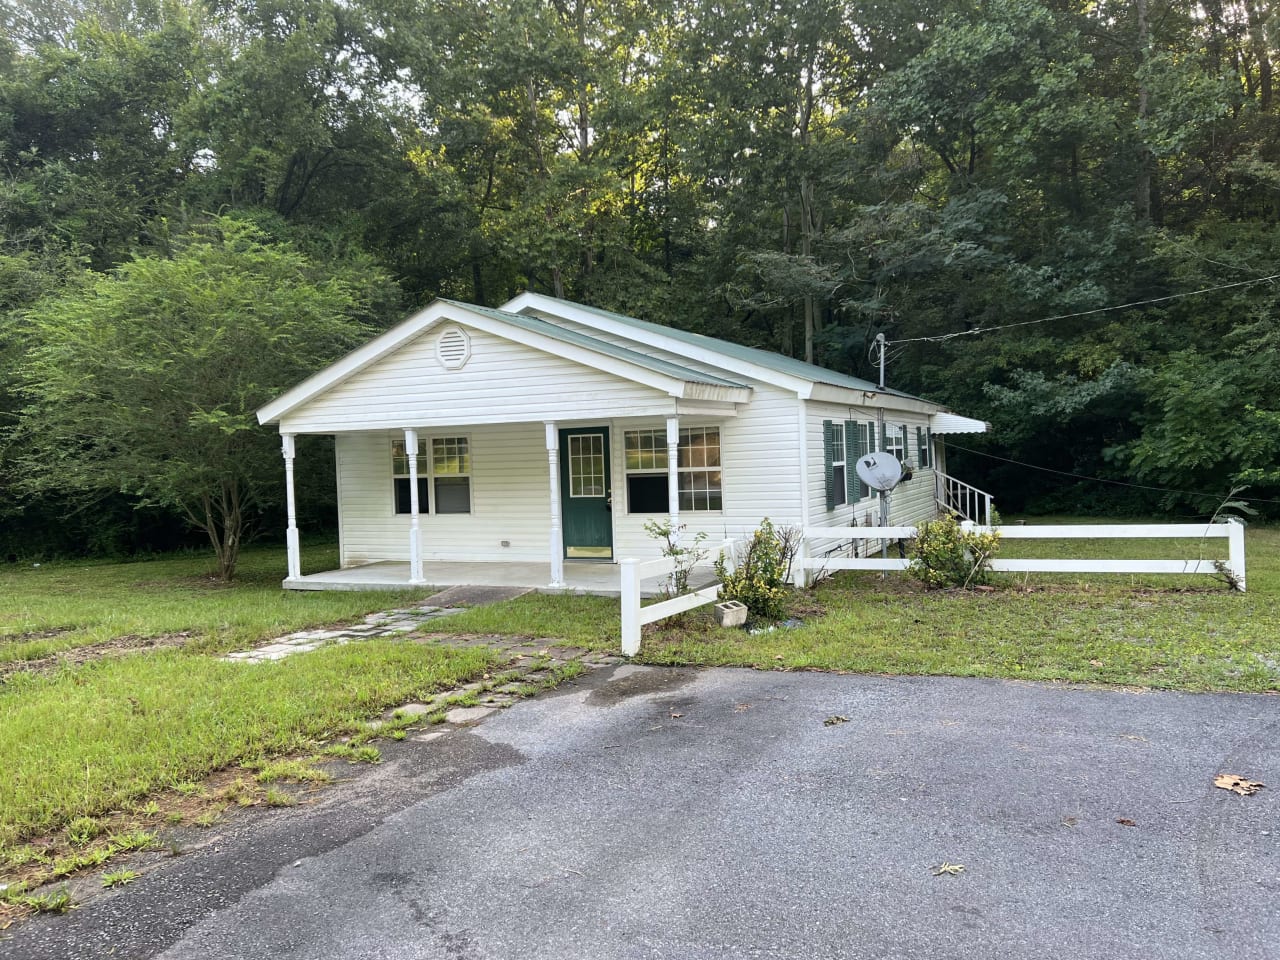 August 26th - Oneonta AL Property Auction